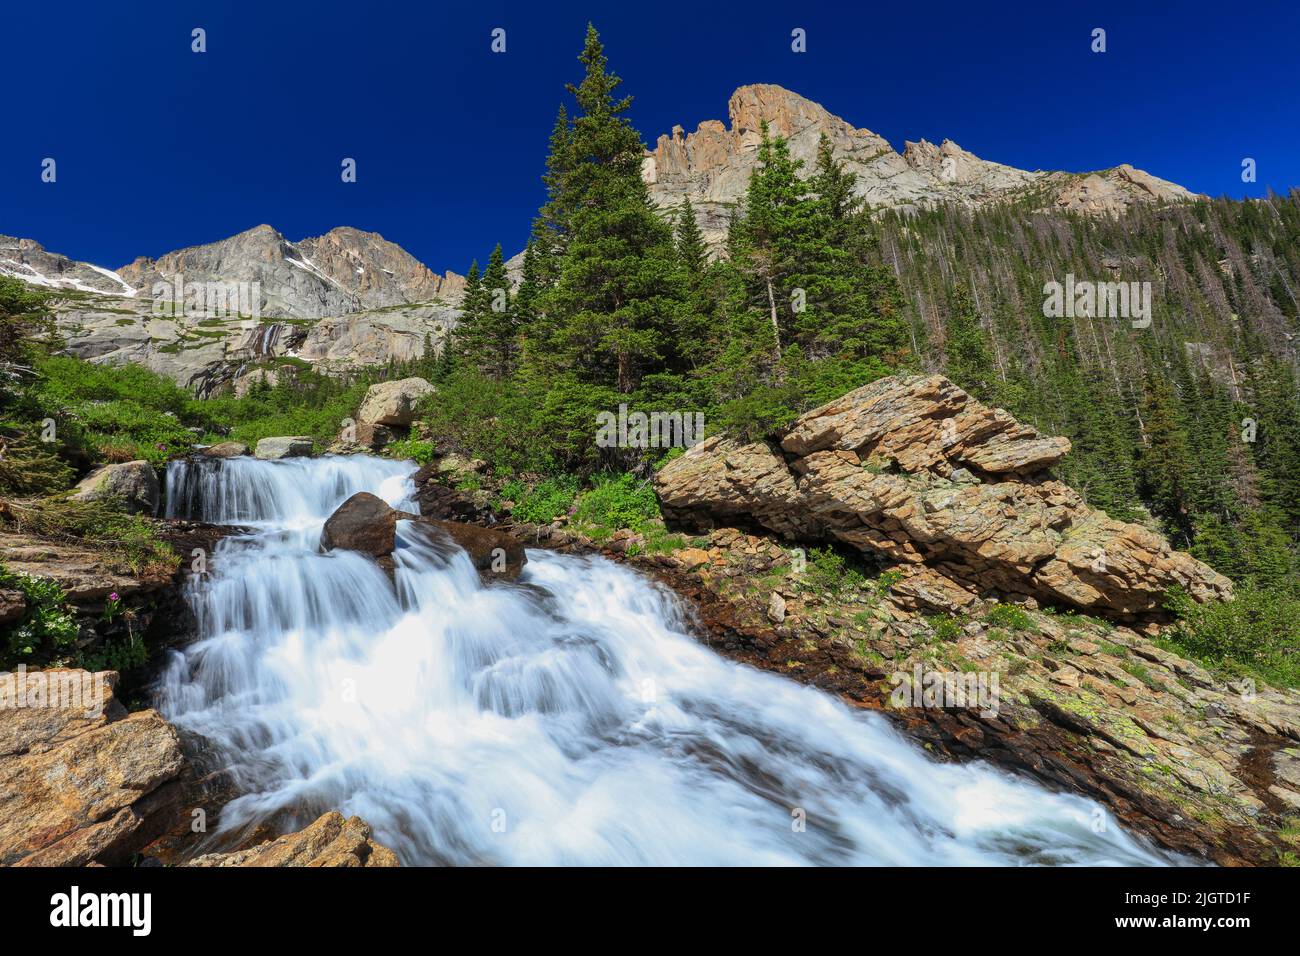 Ribbon Falls is a seasonal waterfall at the base of McHenry's Peak in Rocky Mountain National Park, Colorado Stock Photo